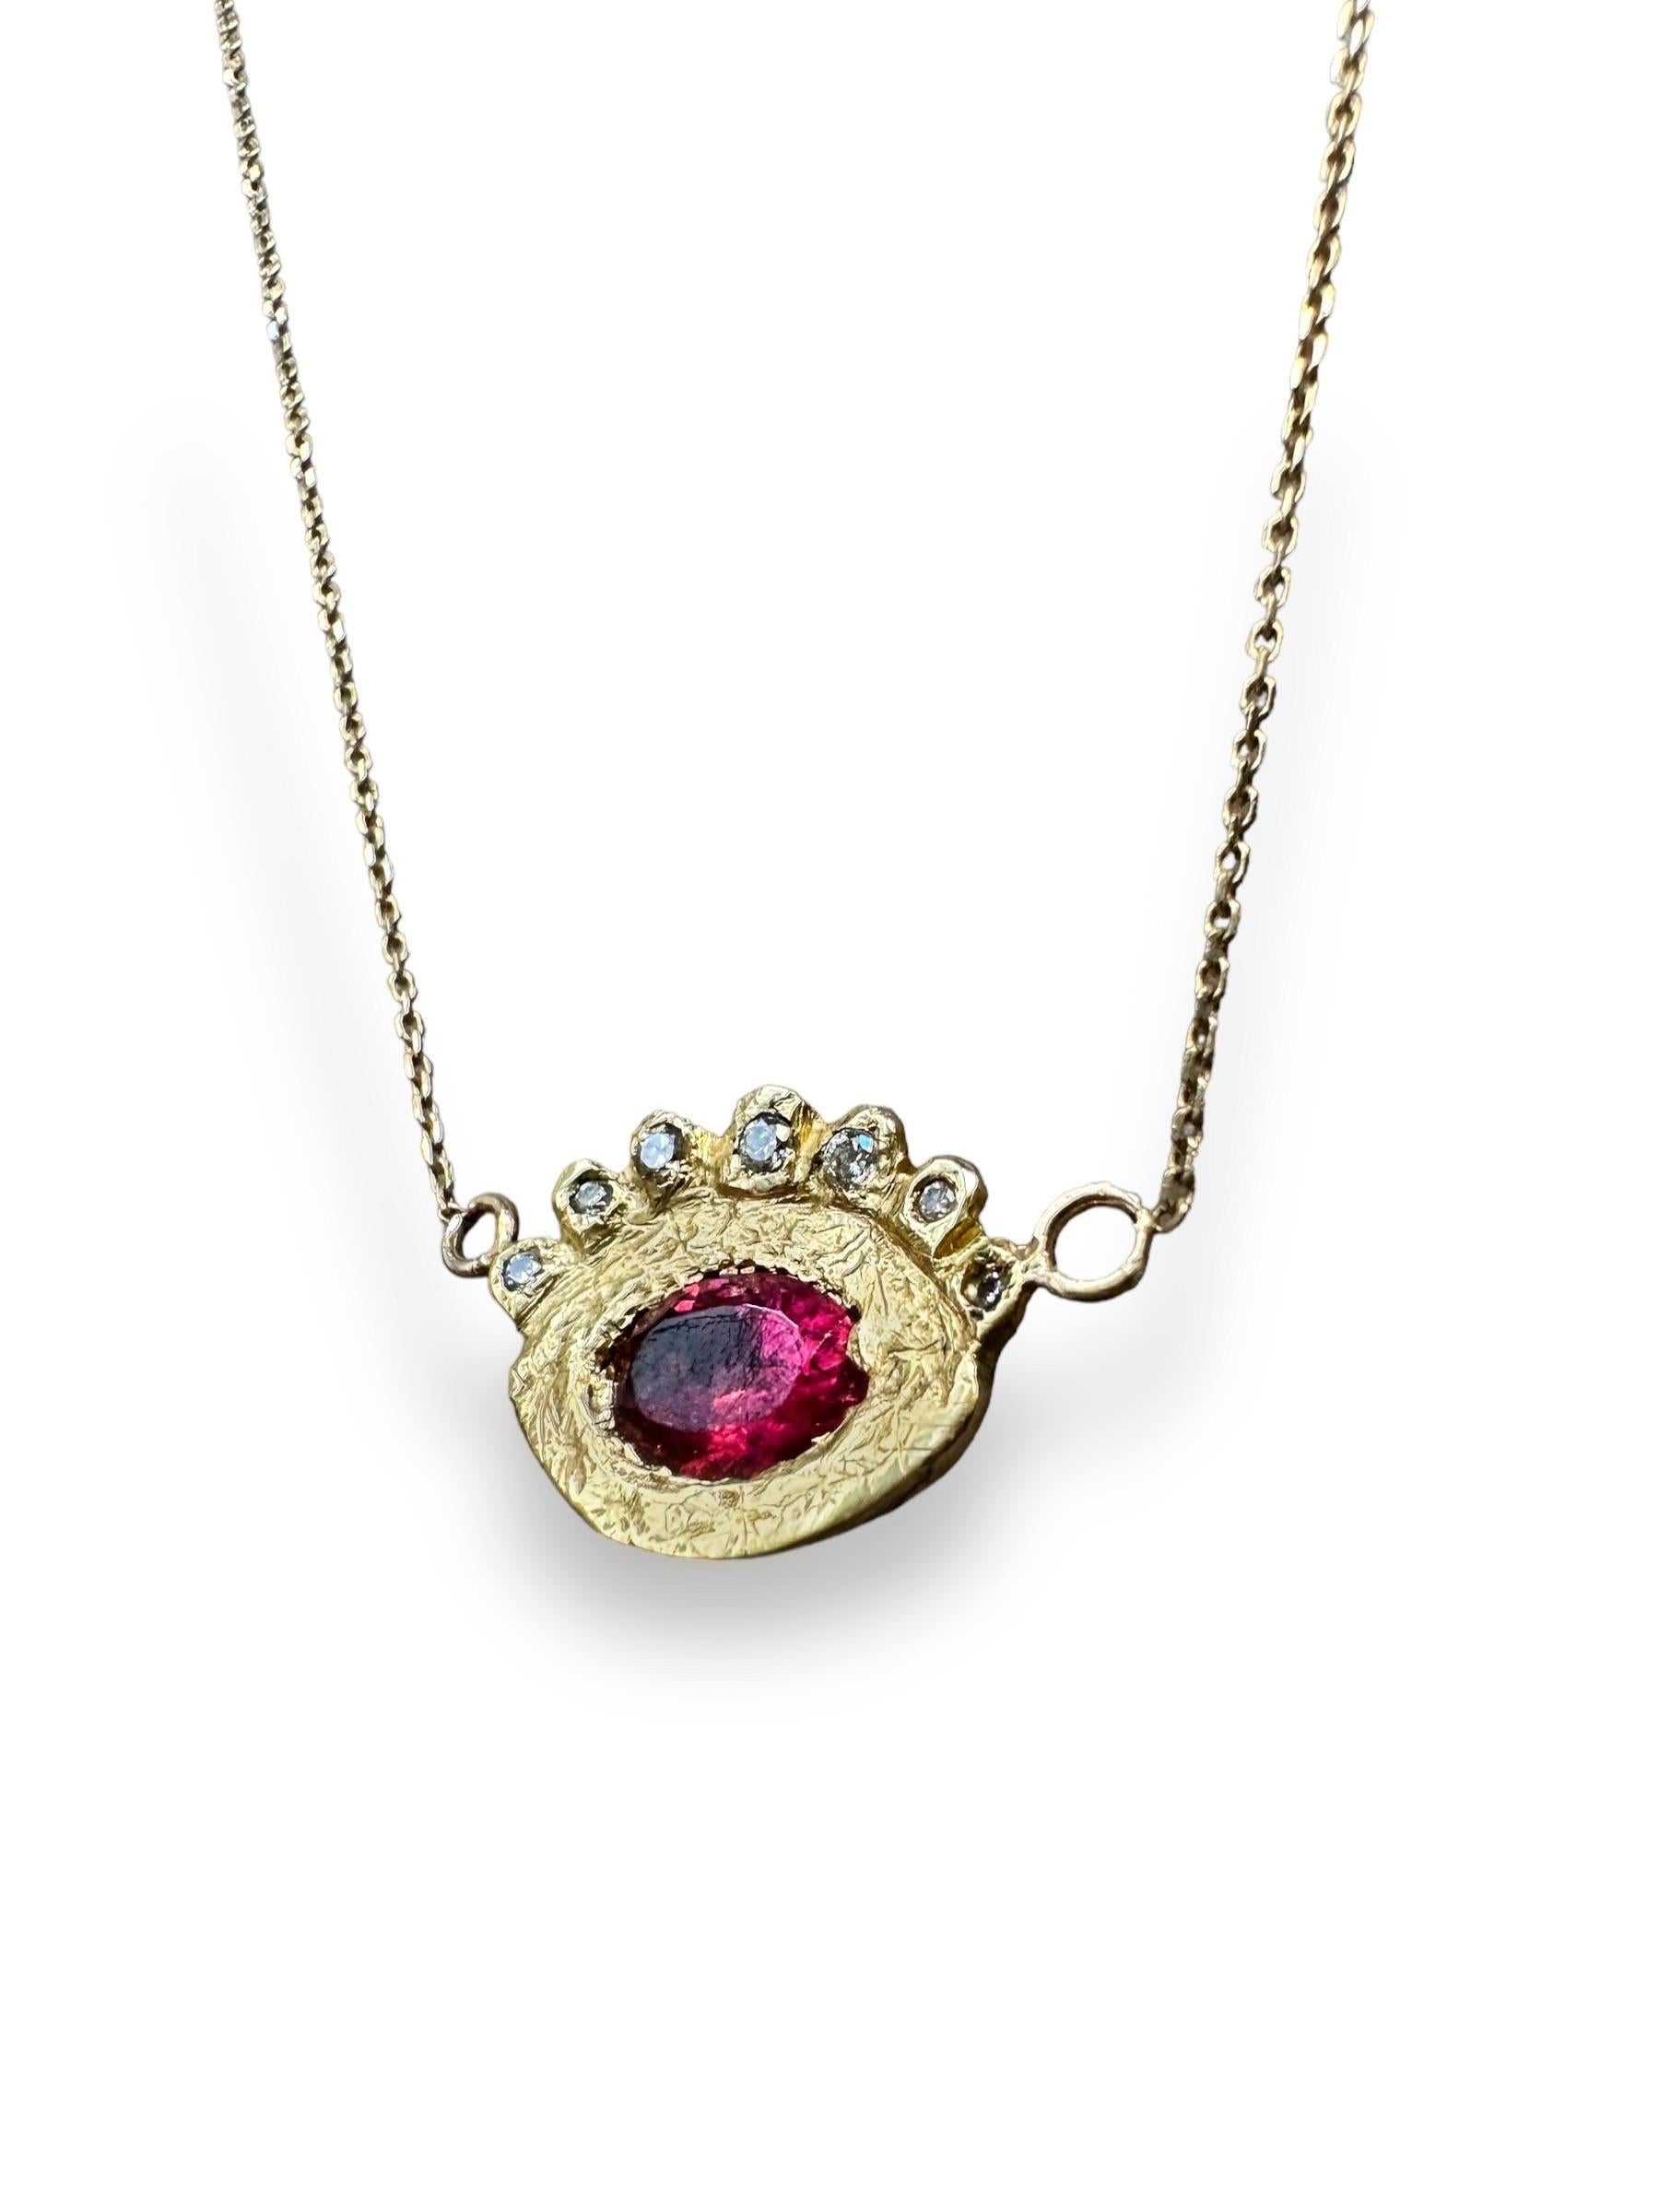 Introducing our elegant and captivating one of a kind Hera 18k yellow gold rubellite eye pendant.

The main protagonist is a beautiful rubellite tourmaline, known for its vibrant and alluring deep reddish-pink hue. Its unique color, combined with